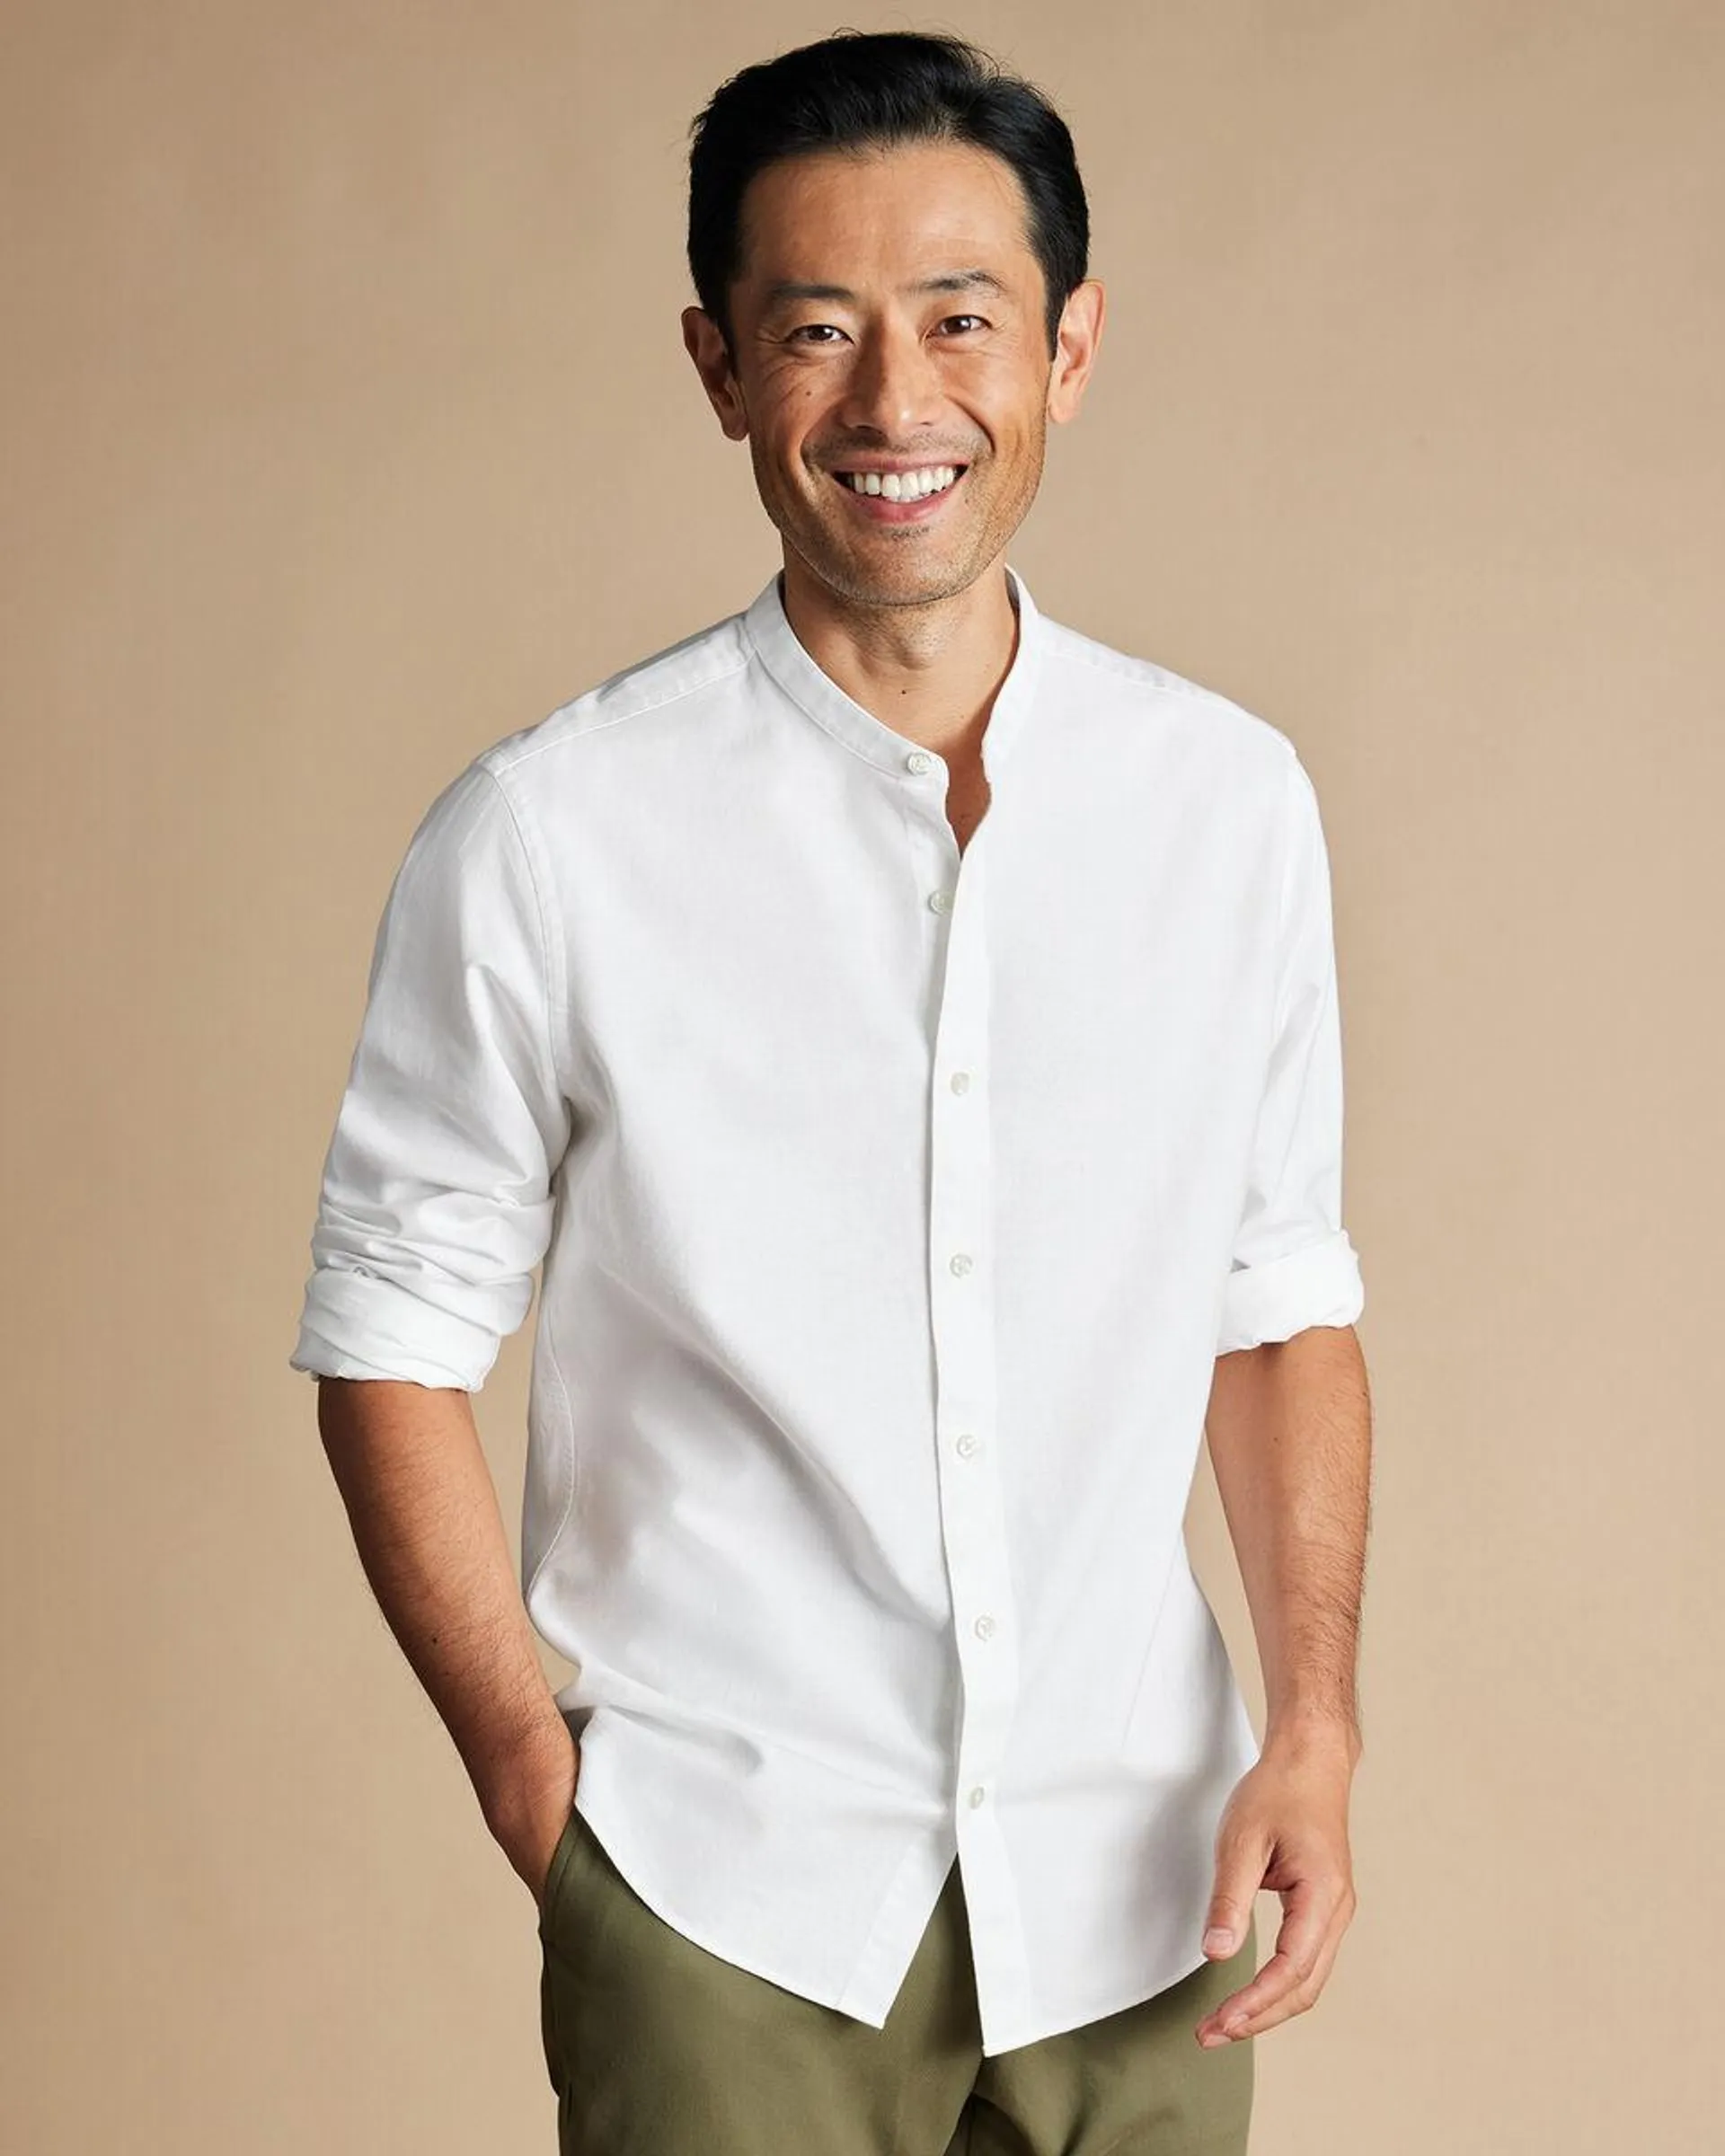 details about product: Collarless Cotton Linen Shirt - White